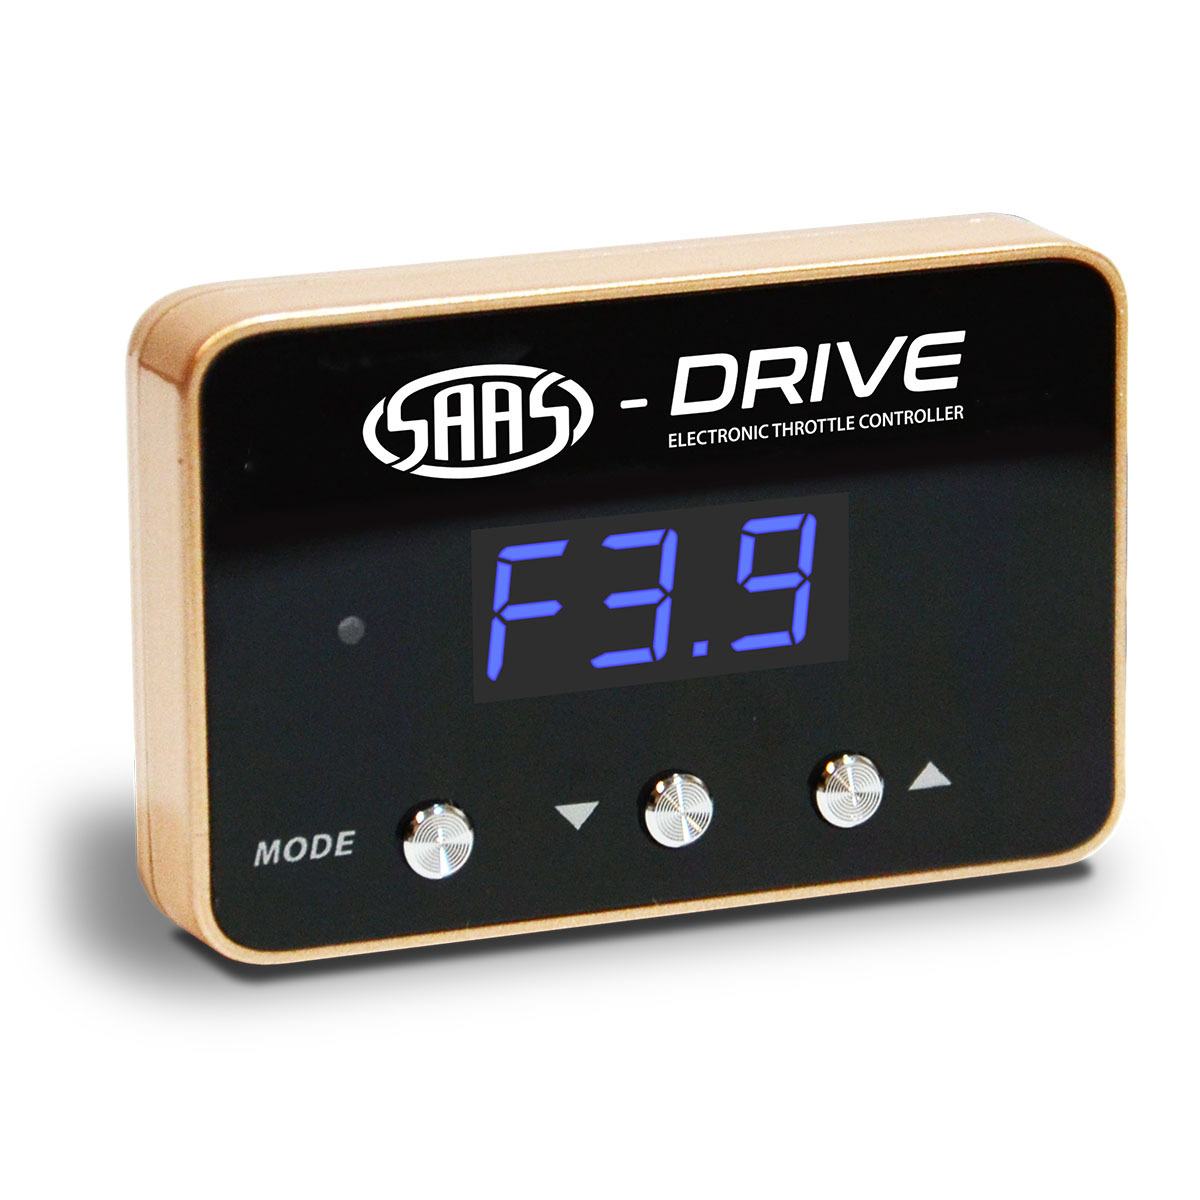 SAAS-Drive Holden Commodore VE 2006 - 2013 Throttle Controller 